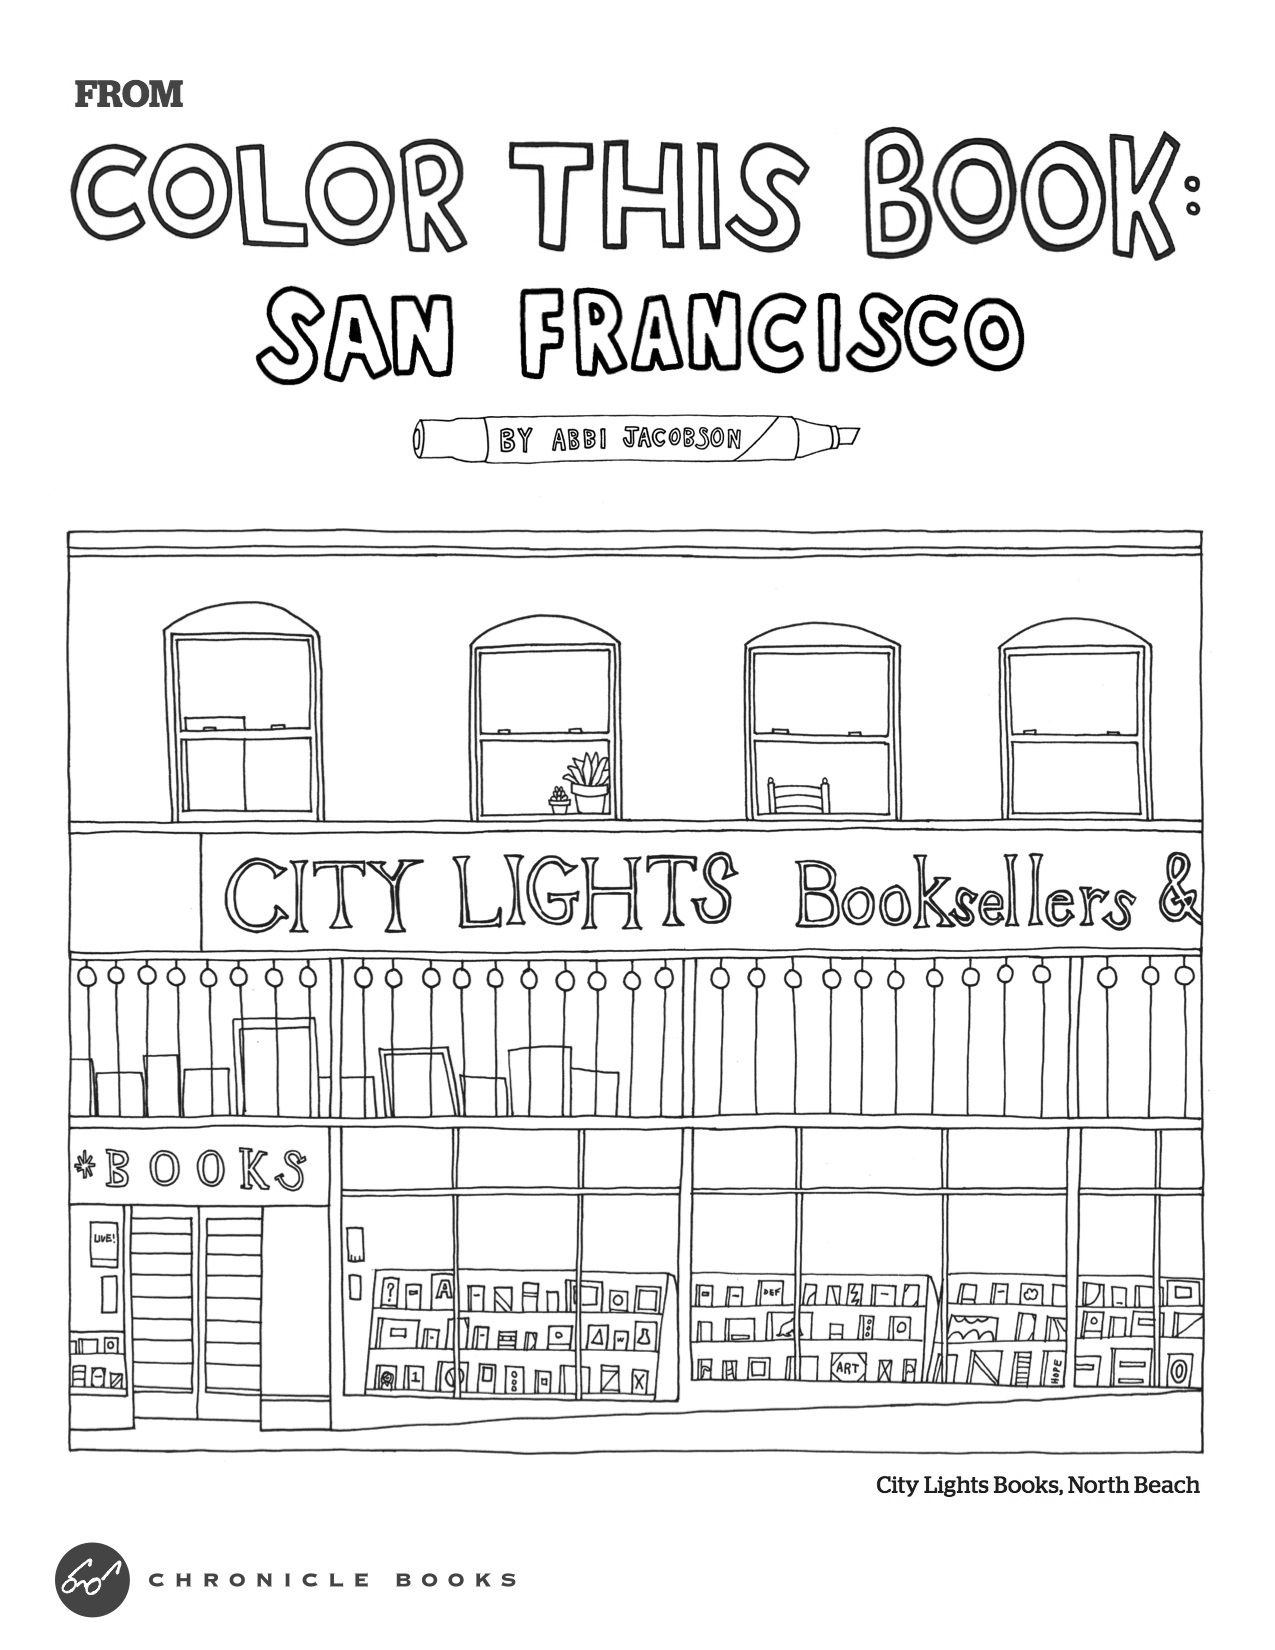 City Coloring Page Coloring Ideas Colorthisbooksfdownload Free City Coloring Pages